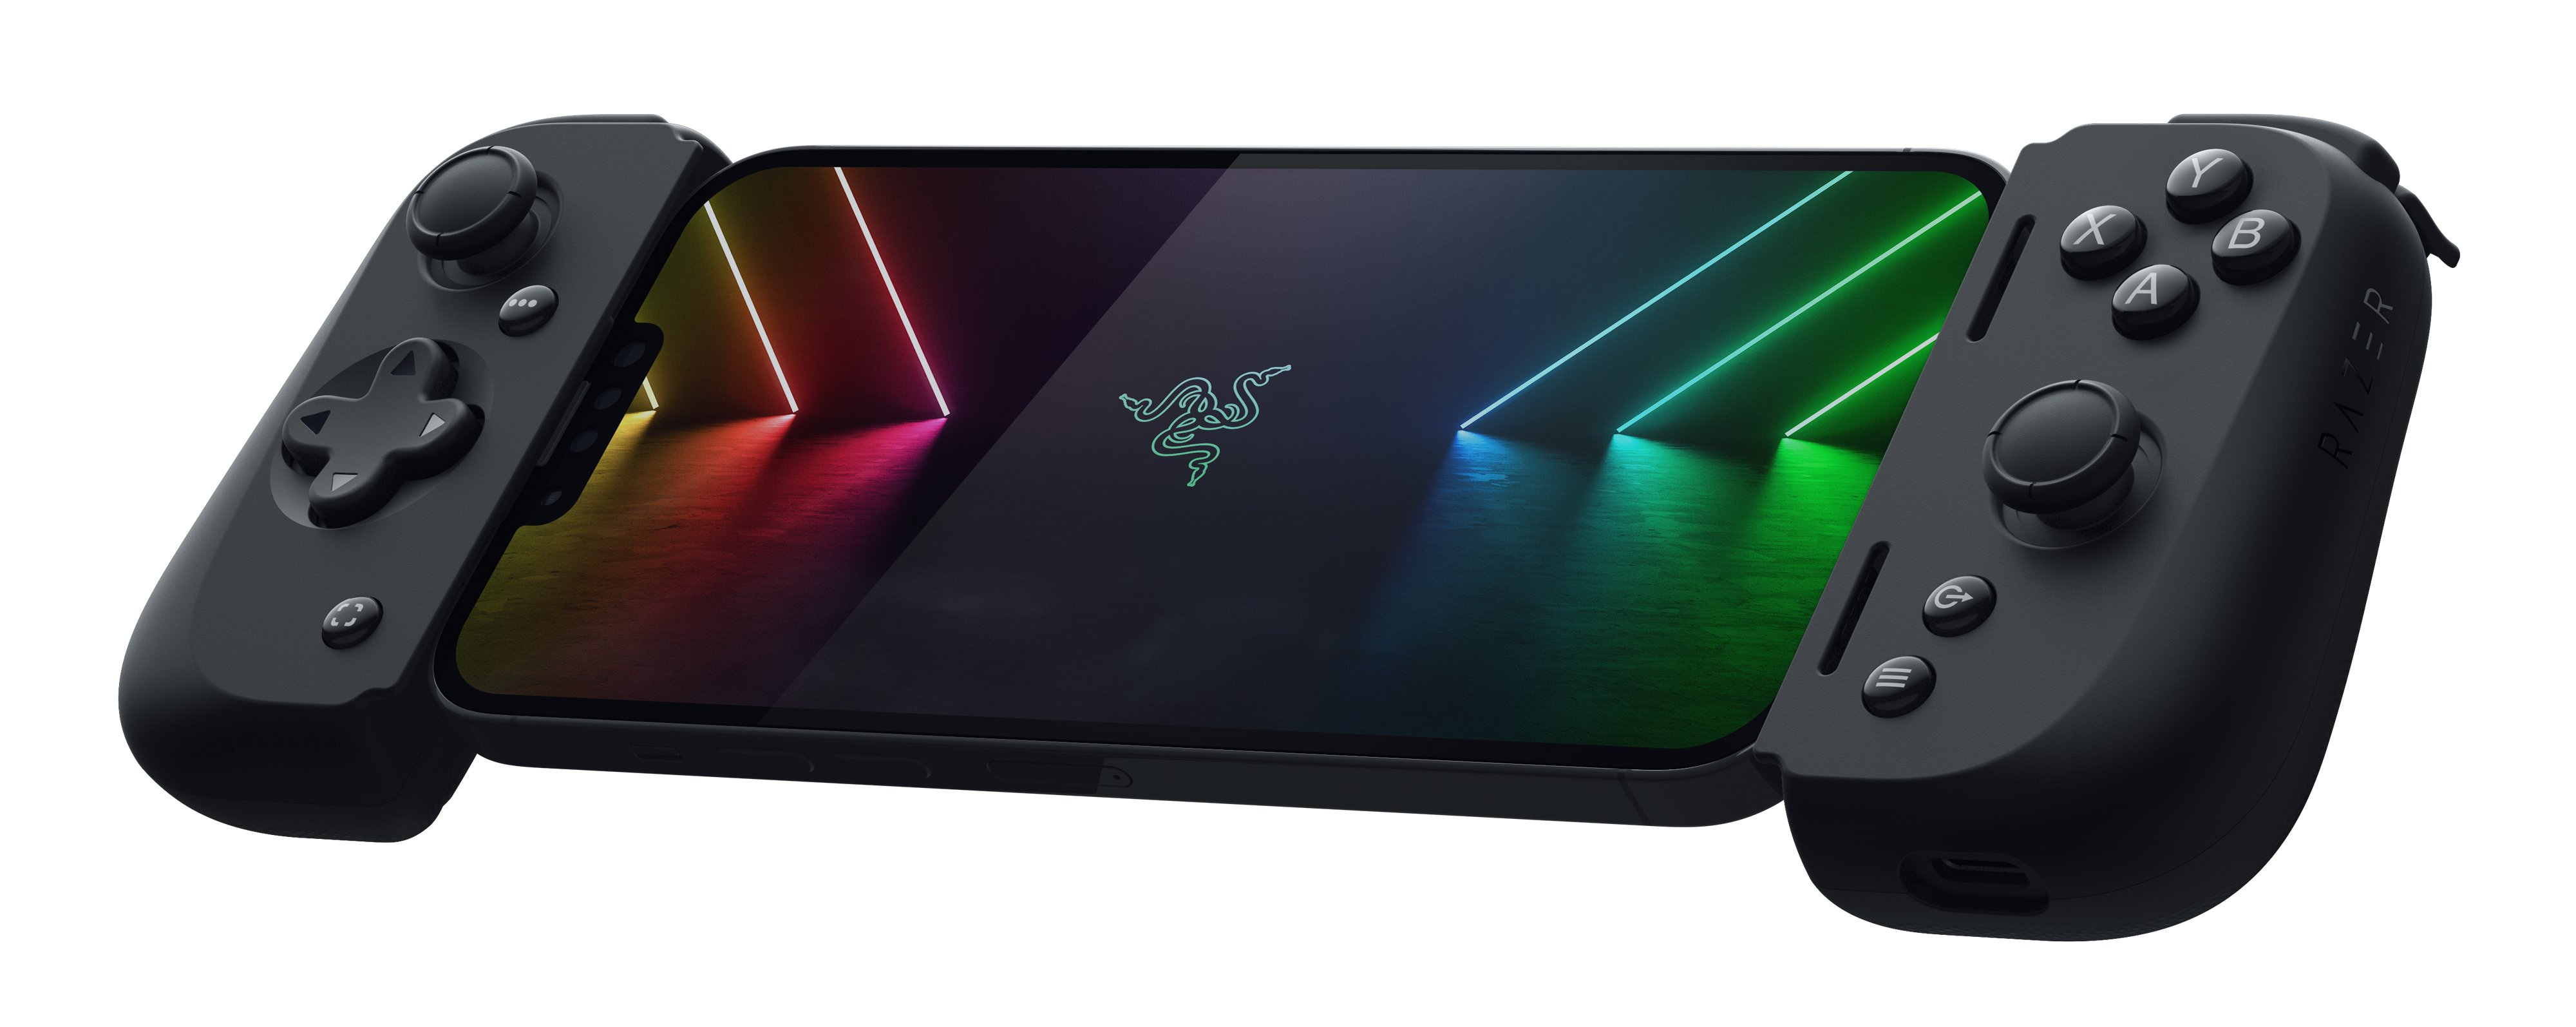 Game Controller for Android and iPhone (Lightning) – Razer Kishi V2